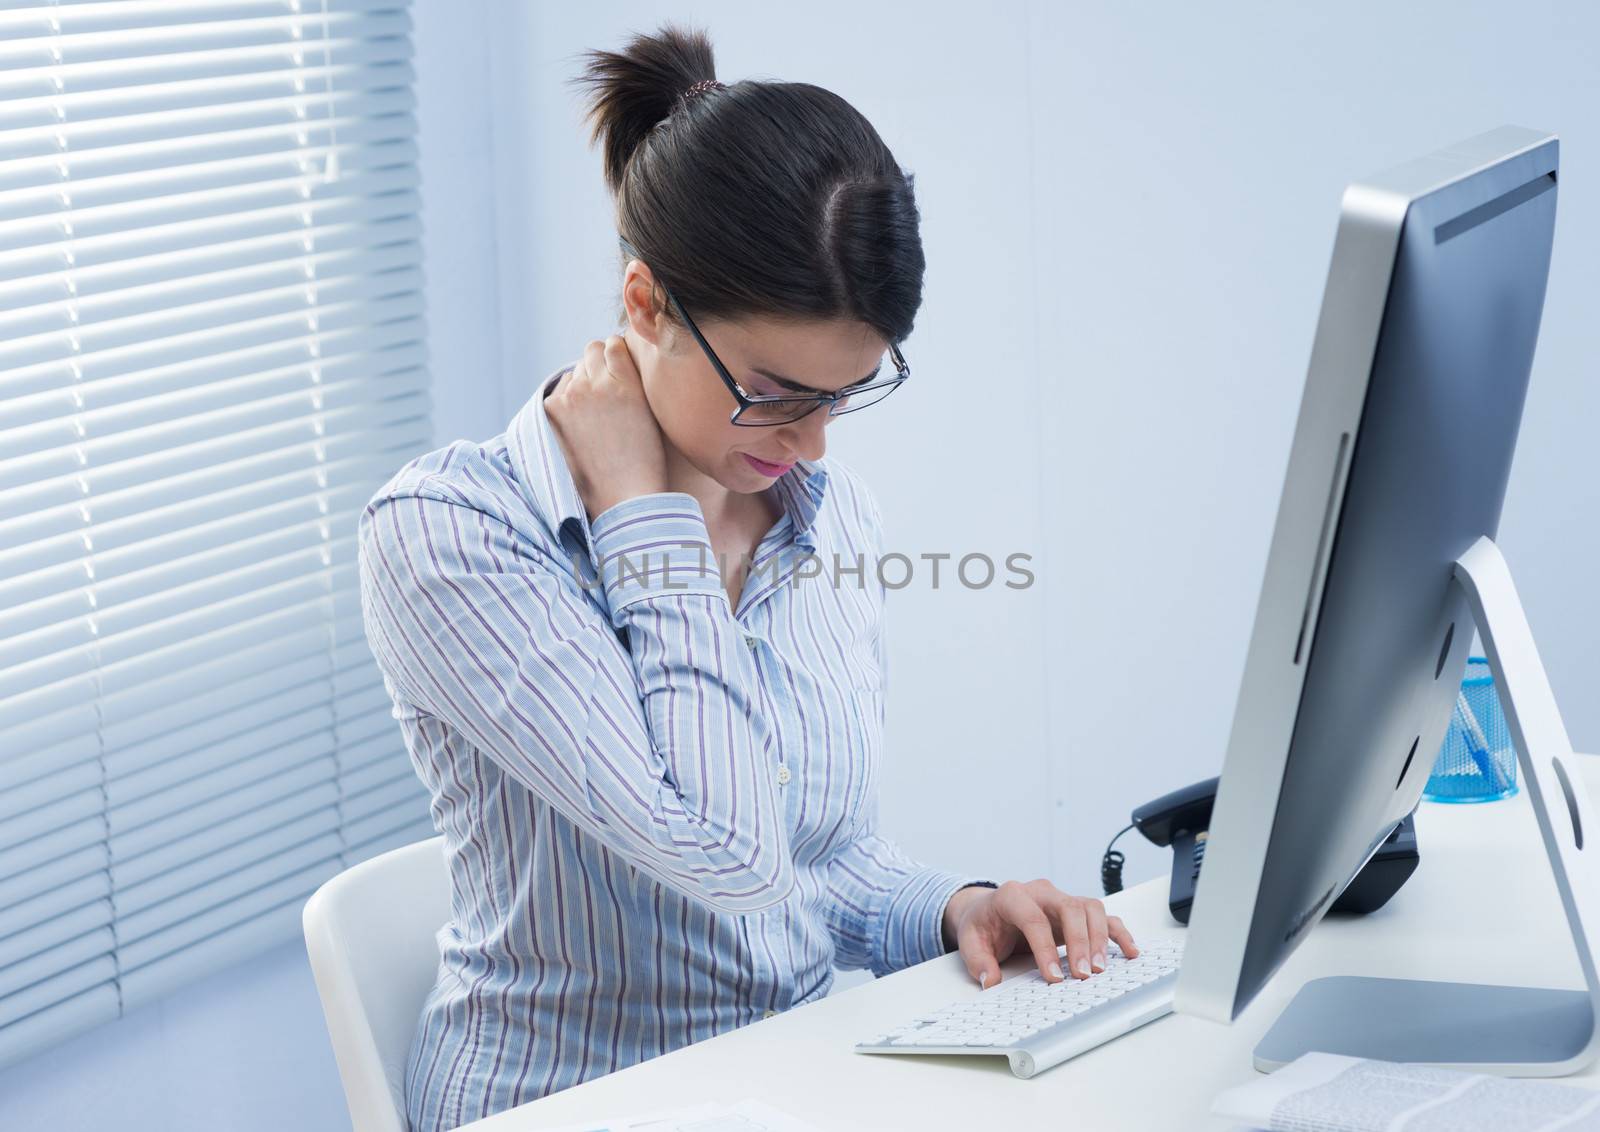 Young office worker with neck pain touching her back.